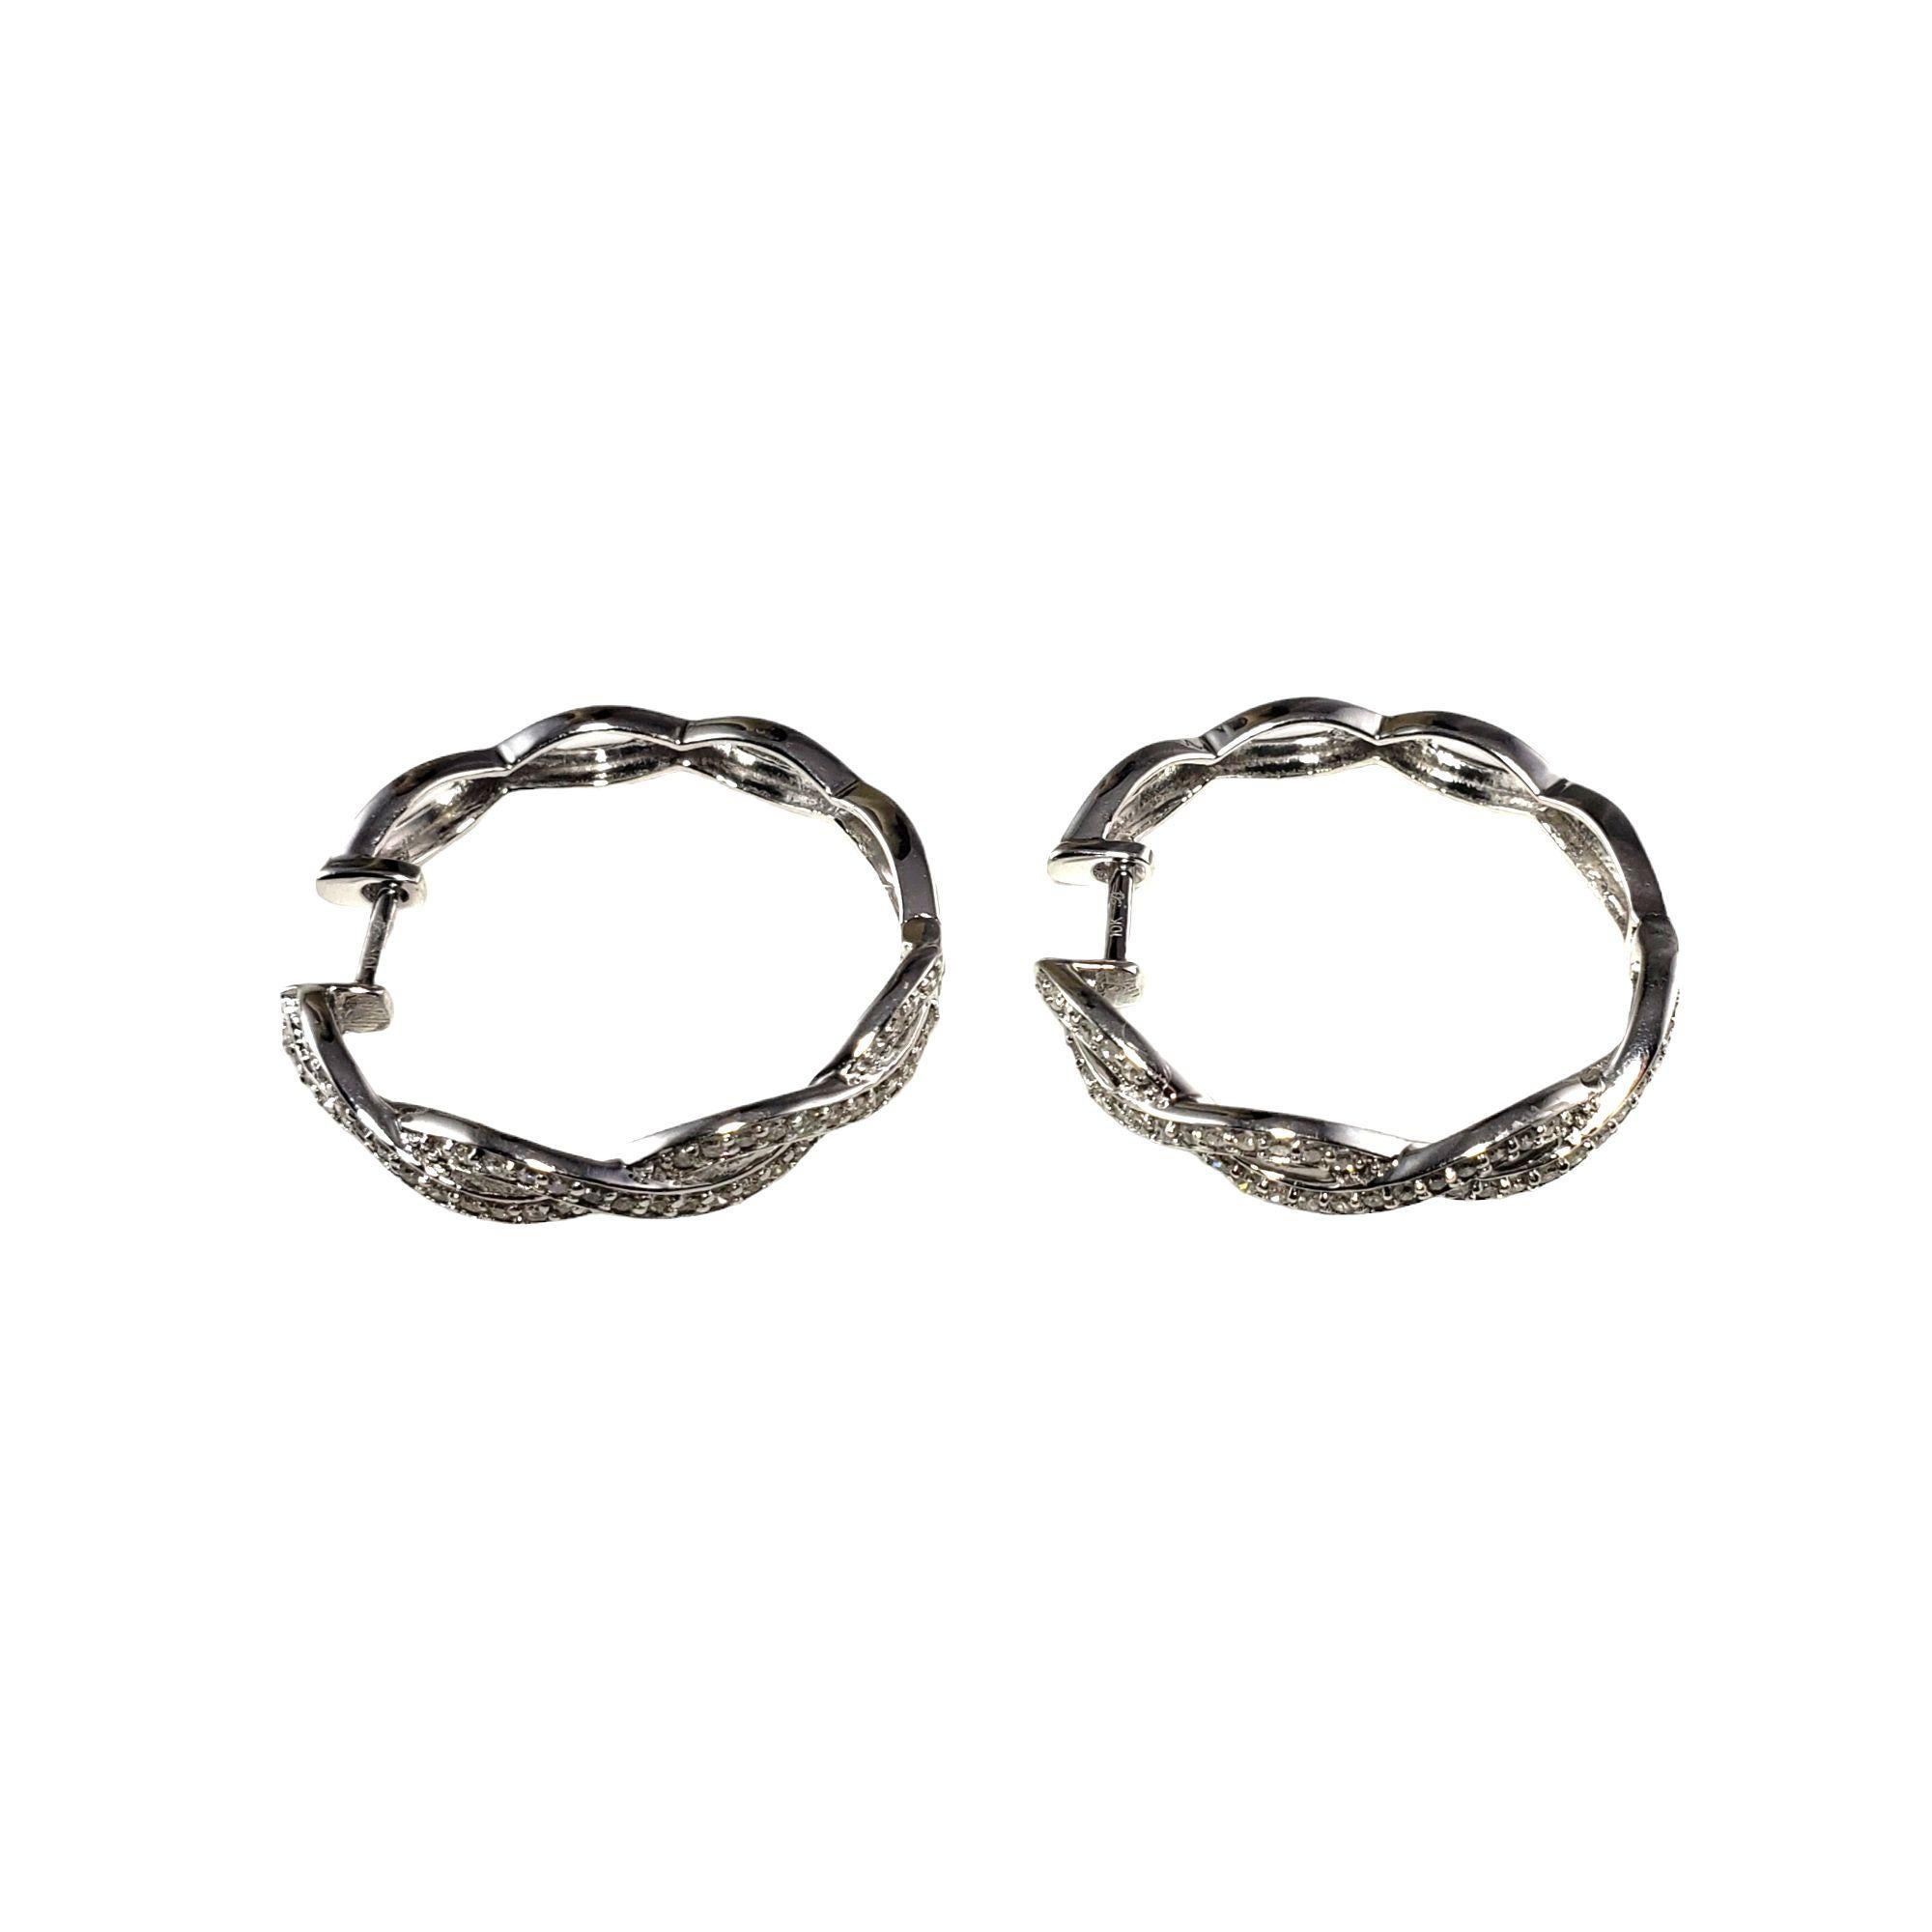 Vintage 10 Karat White Gold and Diamond Hoop Earrings-

These sparkling hoop earrings each feature 48 round single cut diamonds set in classic 10K white gold.

Approximate diamond weight: .50 ct.

Diamond color: I-J

Diamond clarity: SI1

Size: 25